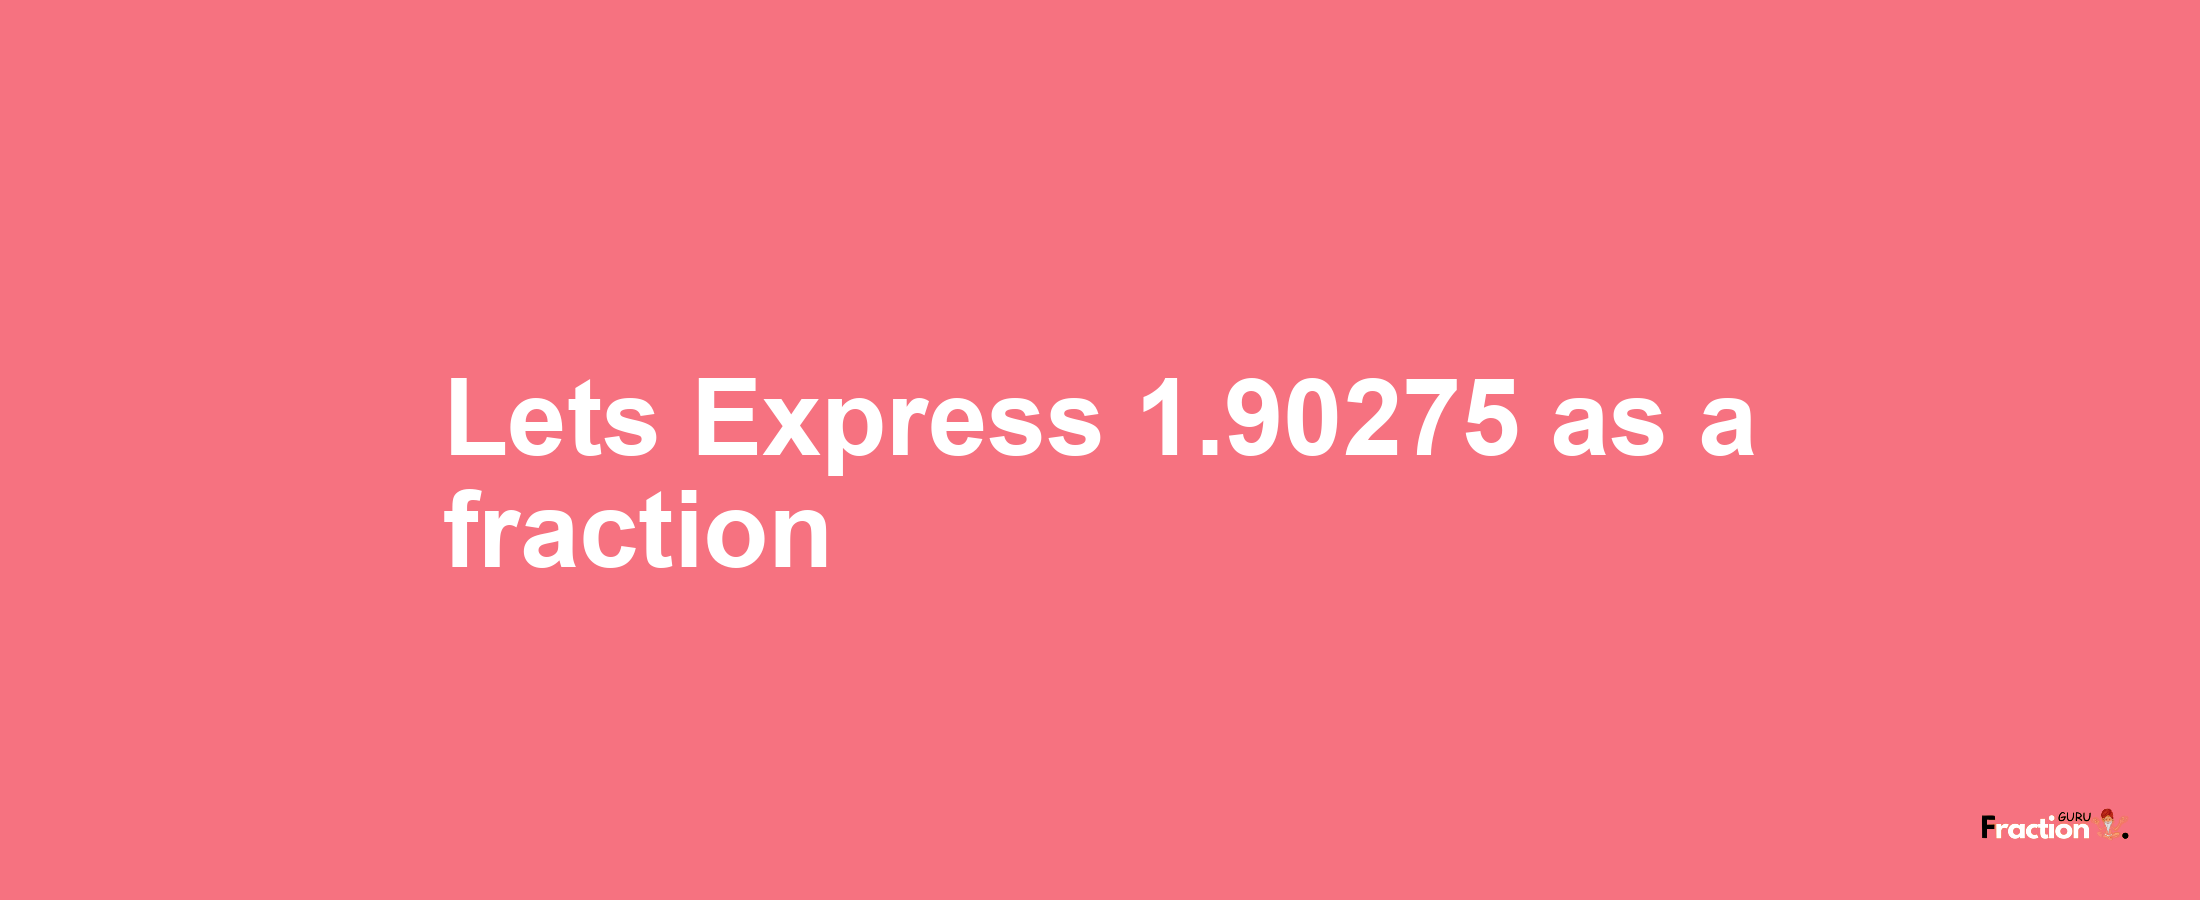 Lets Express 1.90275 as afraction